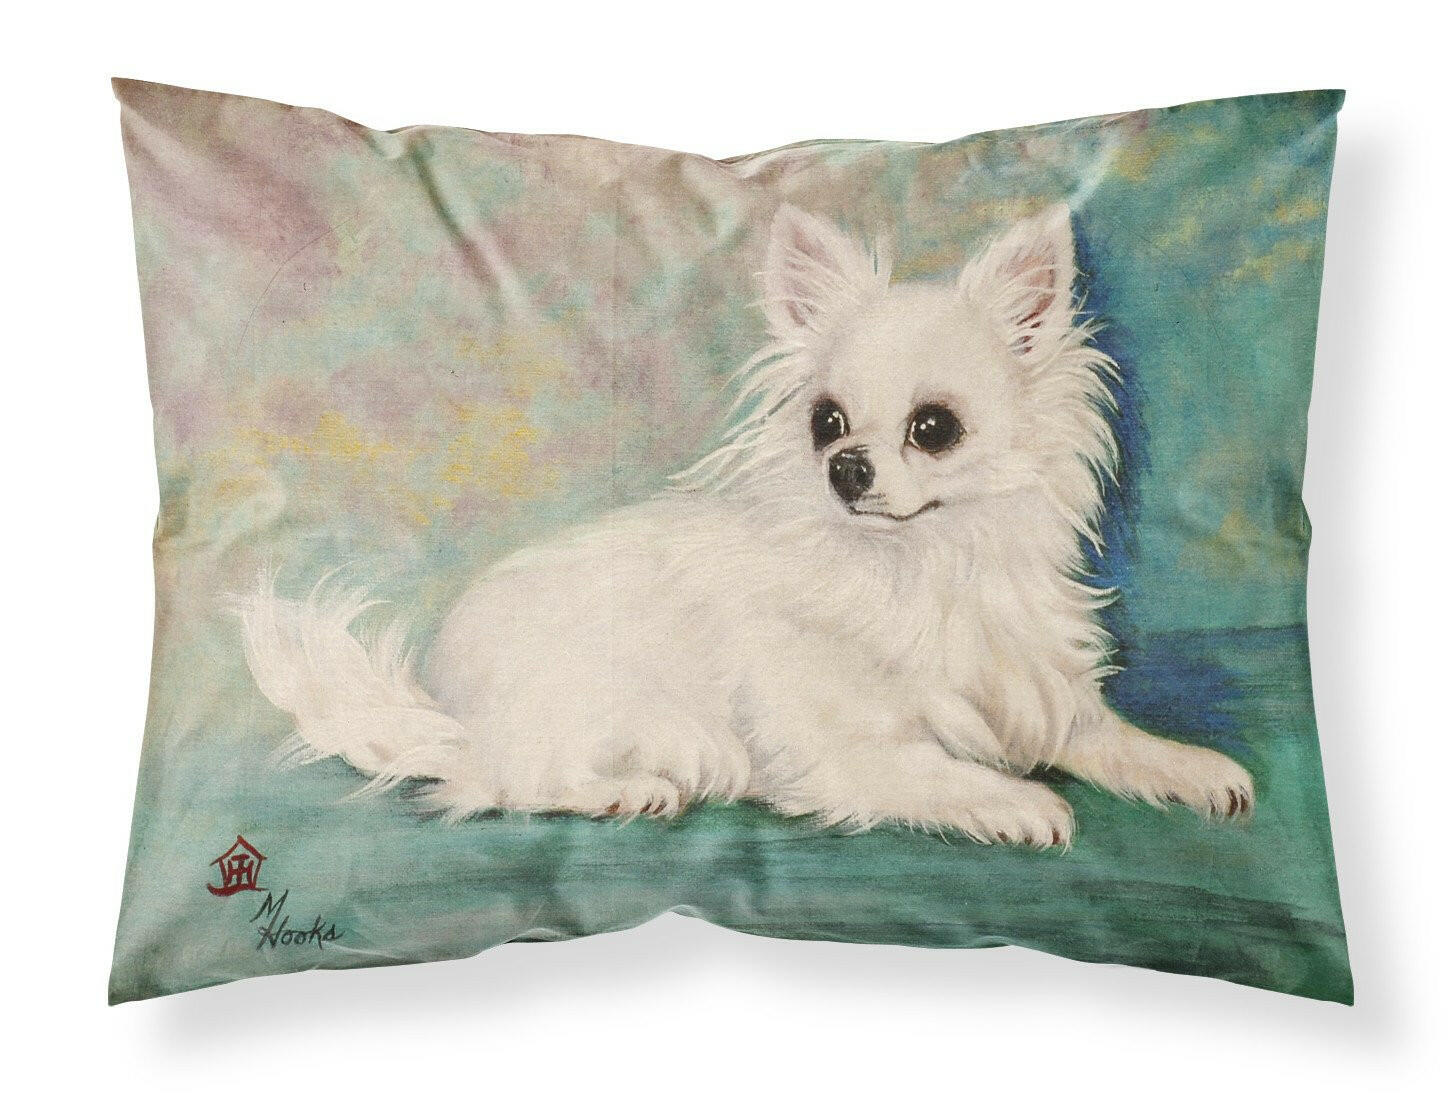 Chihuahua Queen Mother Fabric Standard Pillowcase MH1057PILLOWCASE by Caroline's Treasures